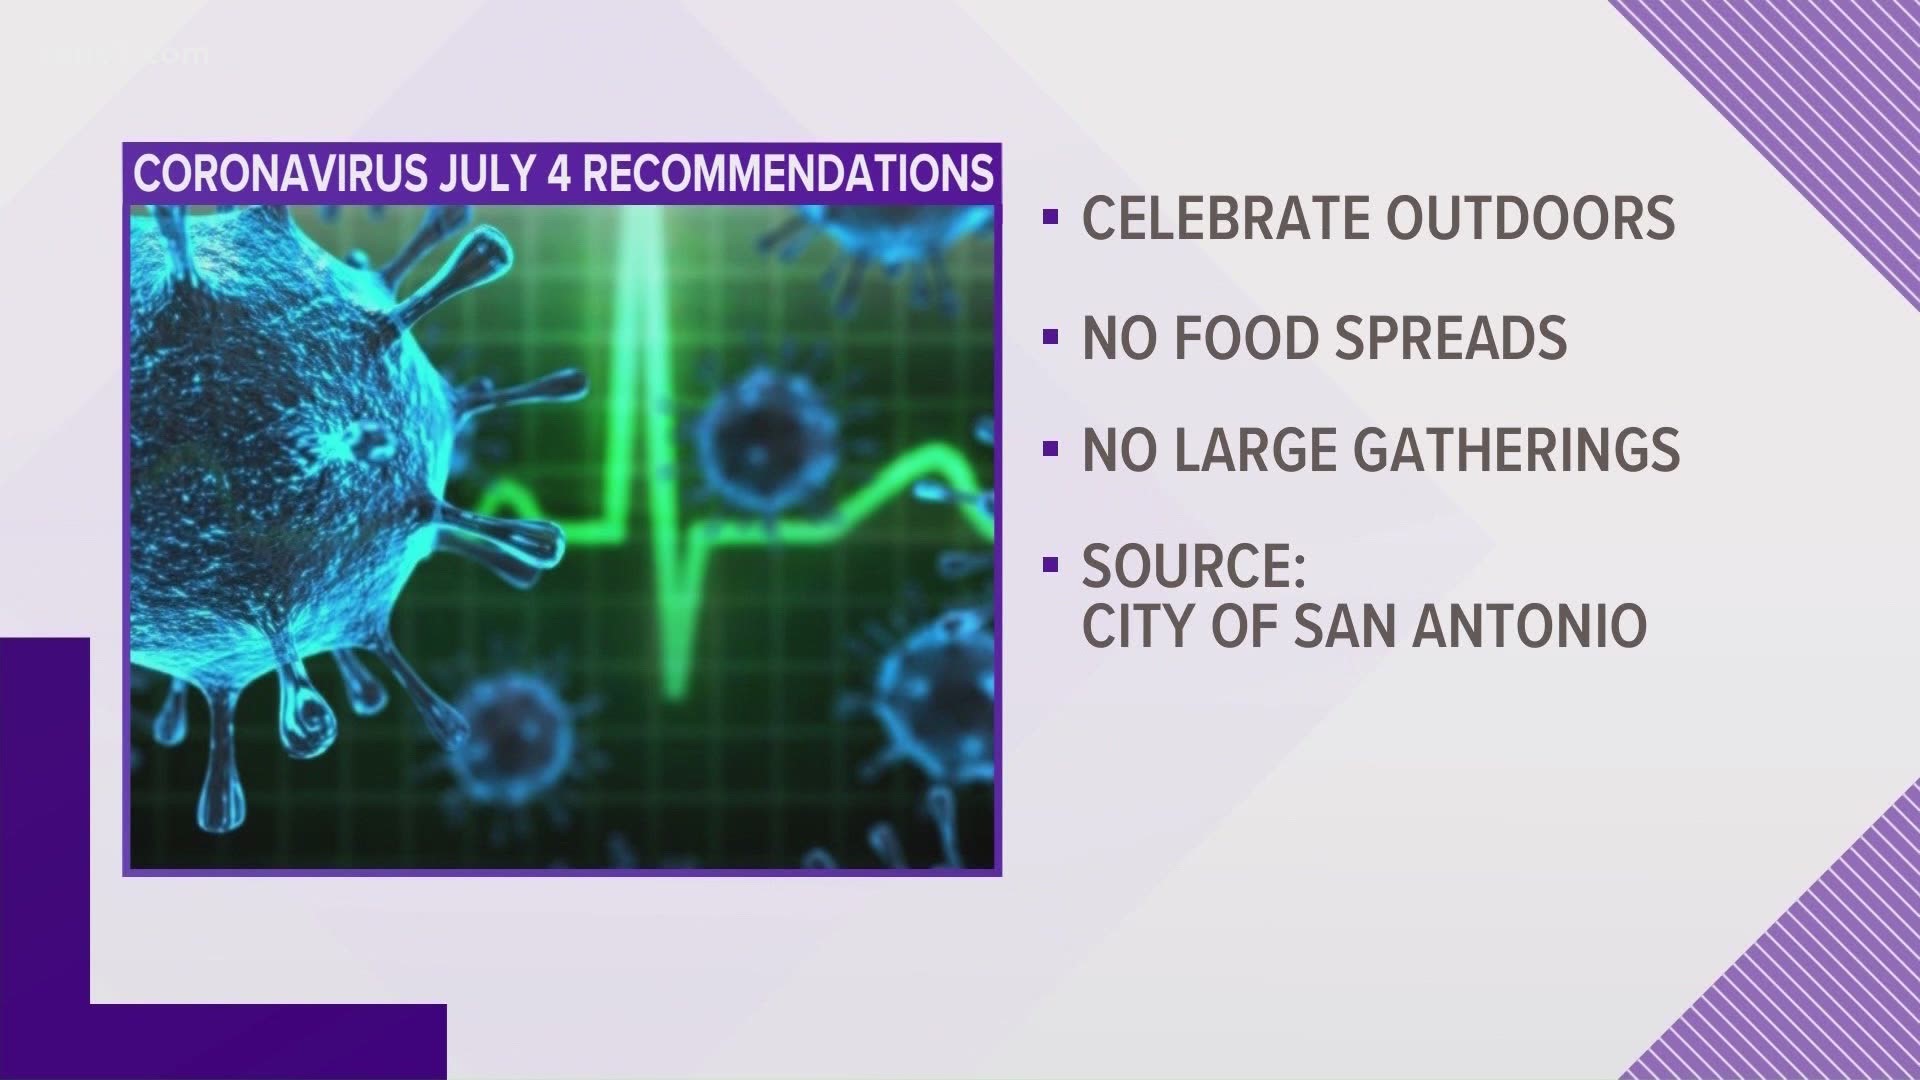 Local and state officials are worried an increase during the Fourth of July holiday weekend could overwhelm hospitals, which are already seeing record numbers.